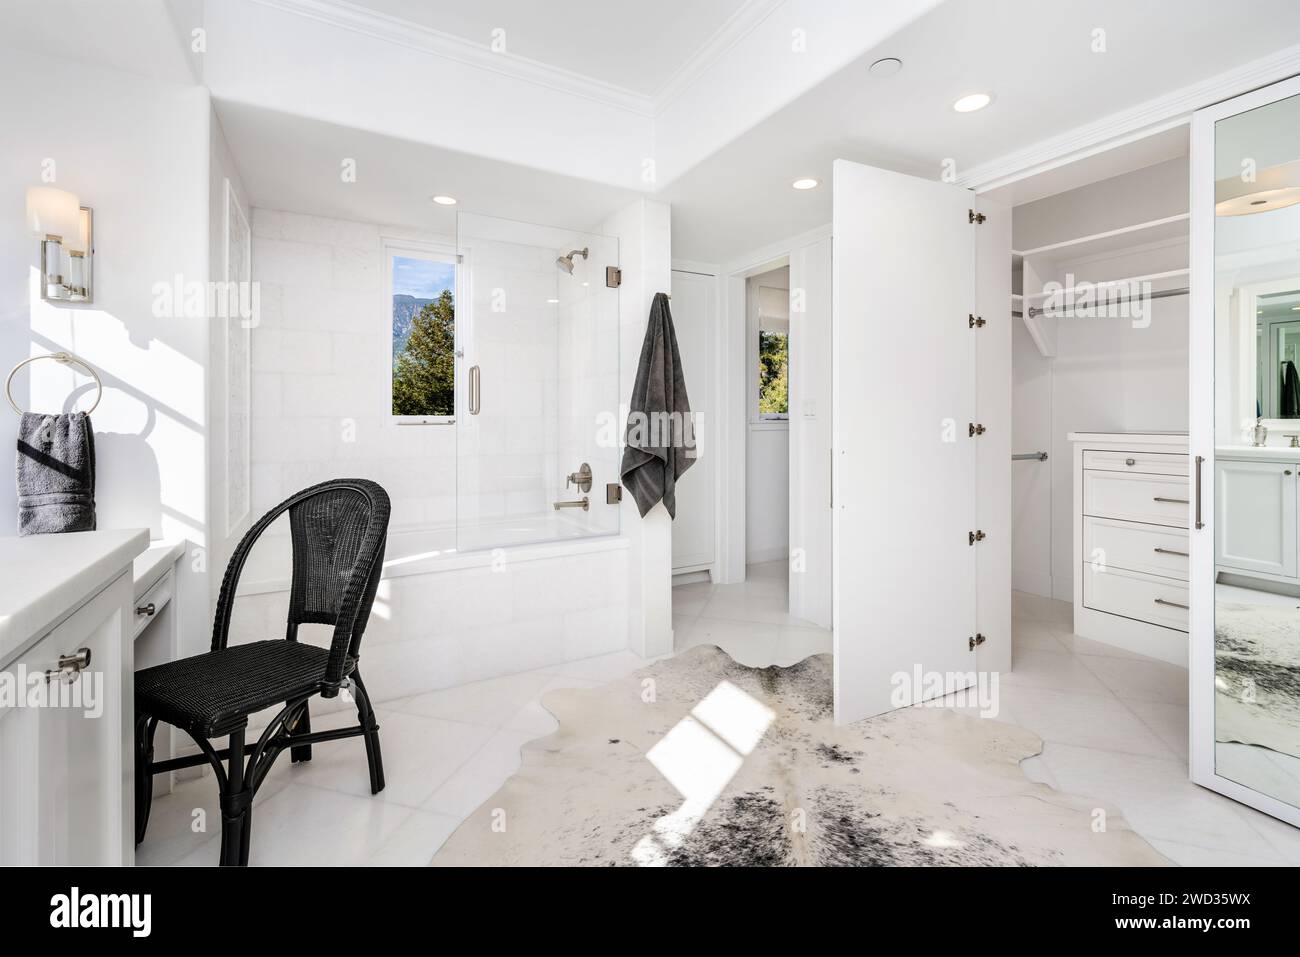 A large white bathroom with toilet, vanity, closet, and mirror Stock Photo